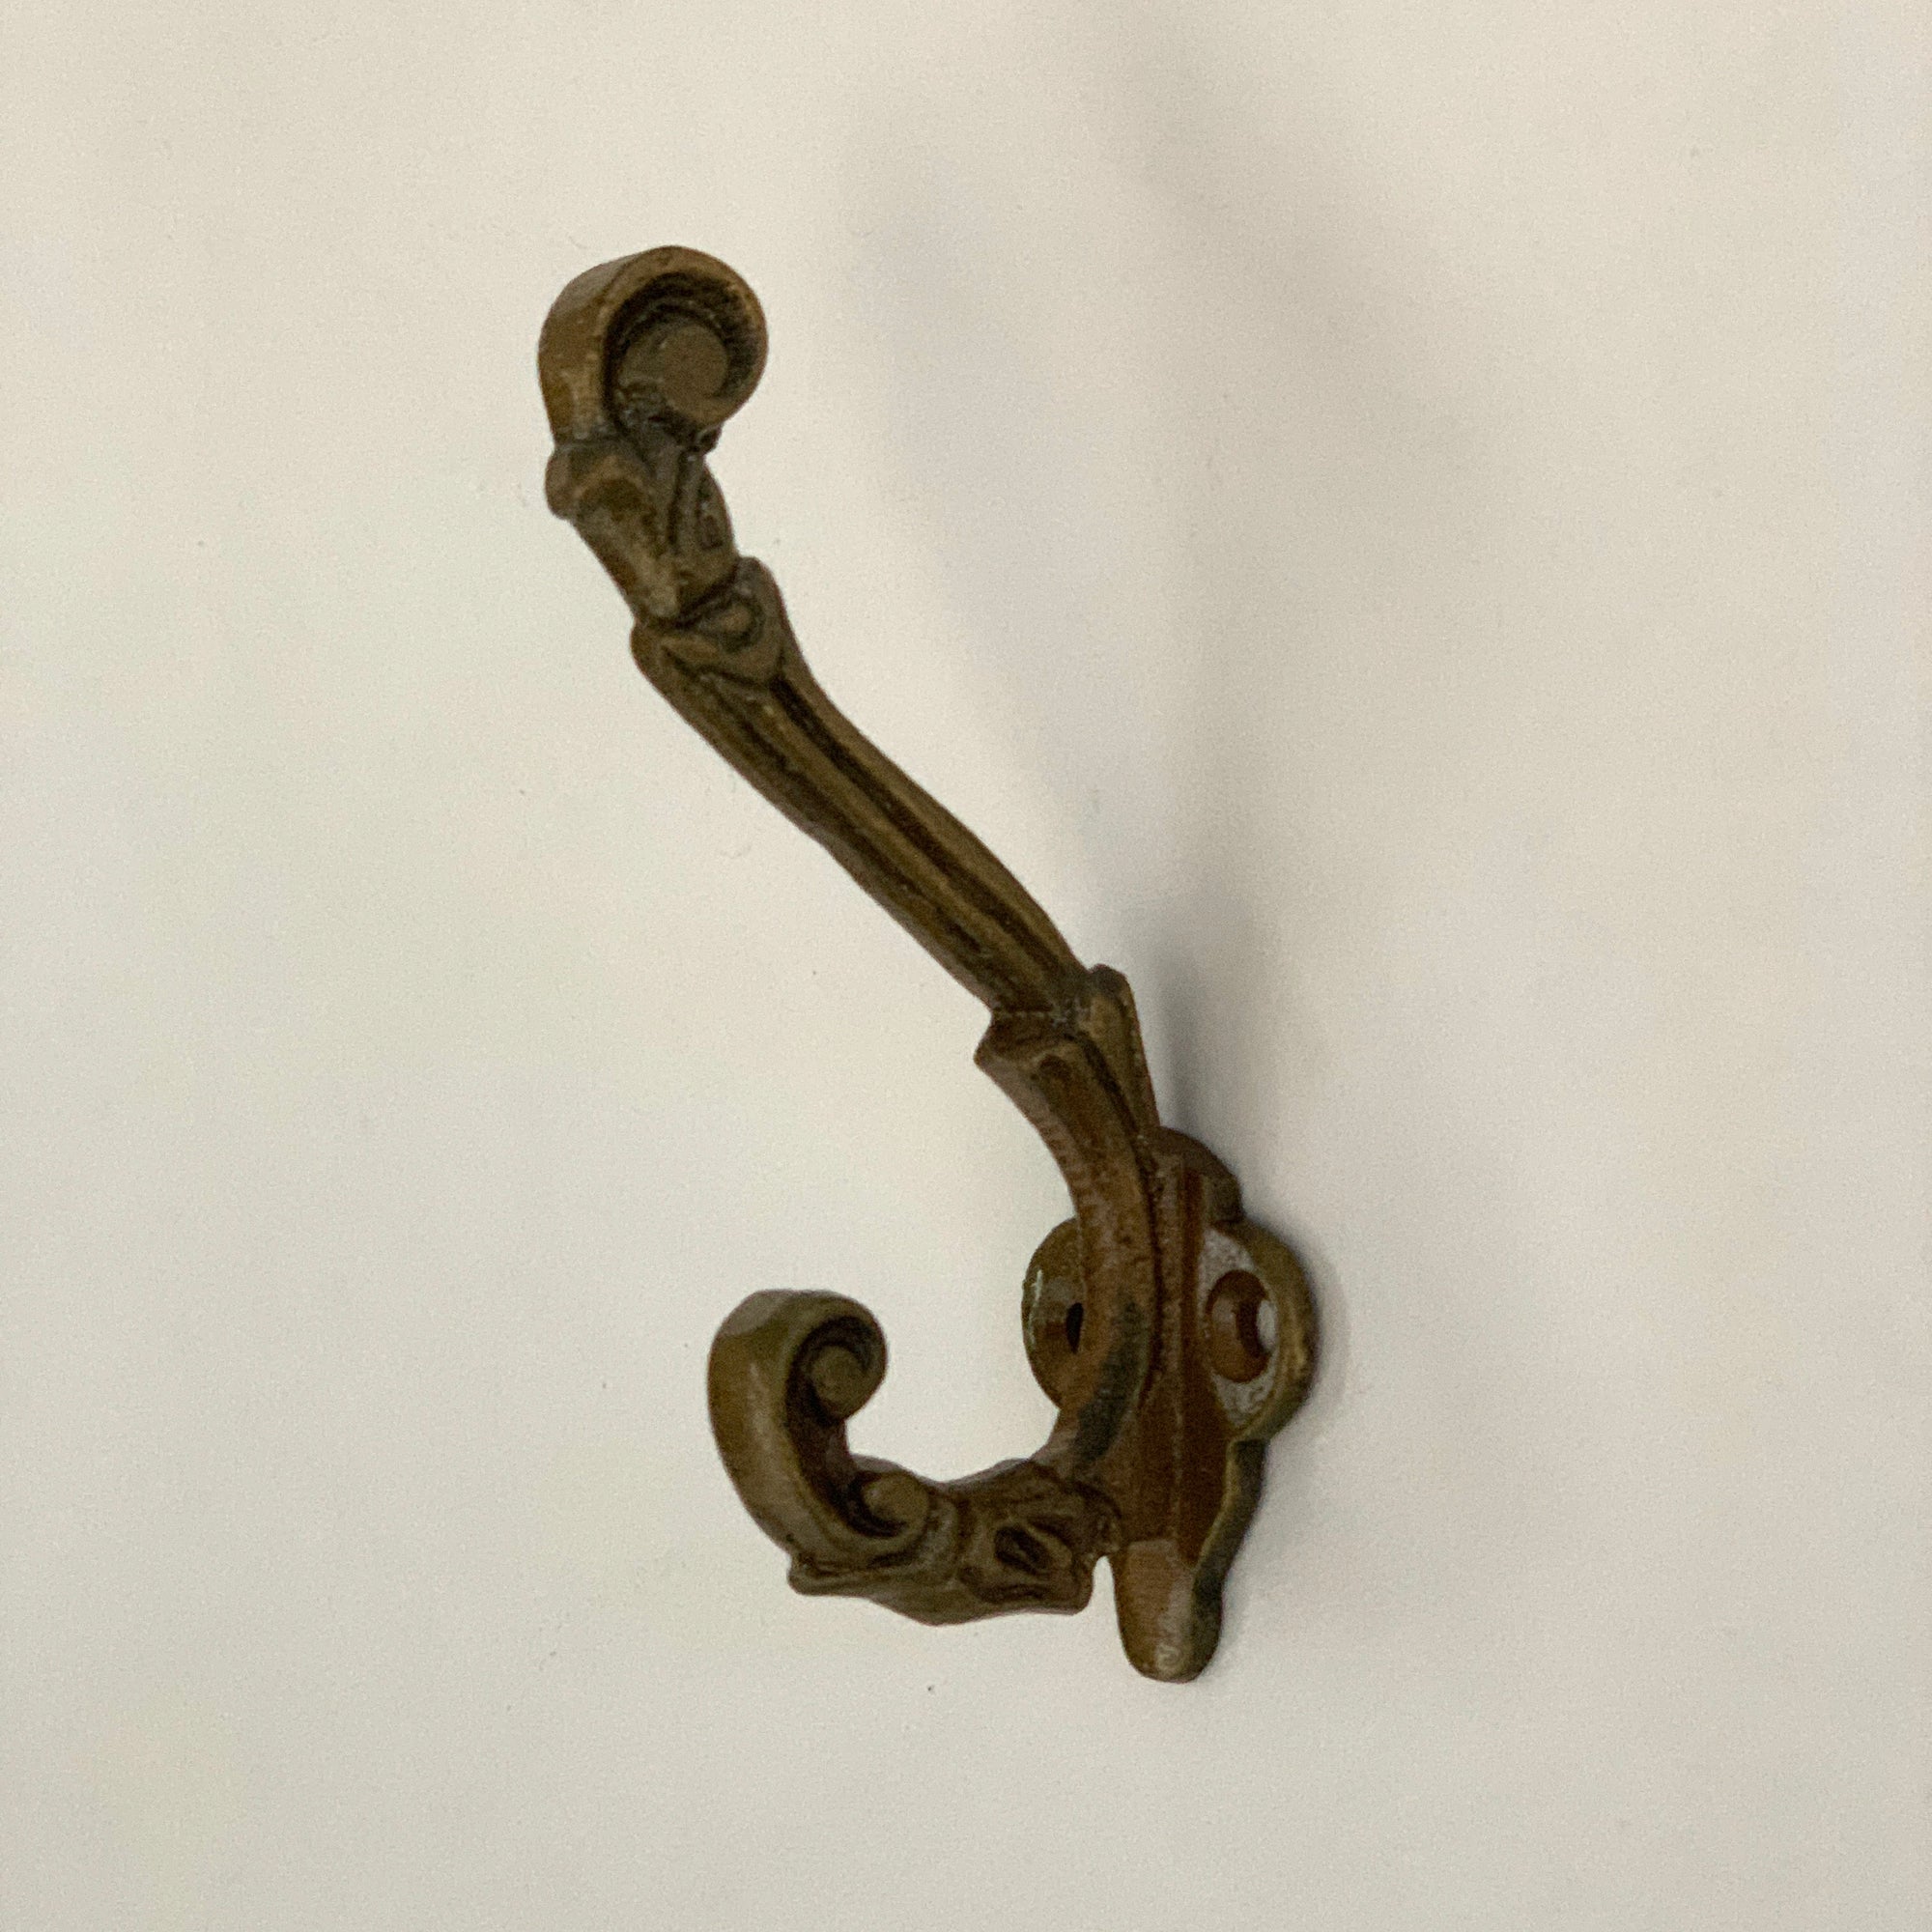 Sale/Cast iron Decorative wall hook/Pick color/ Shabby chic metal